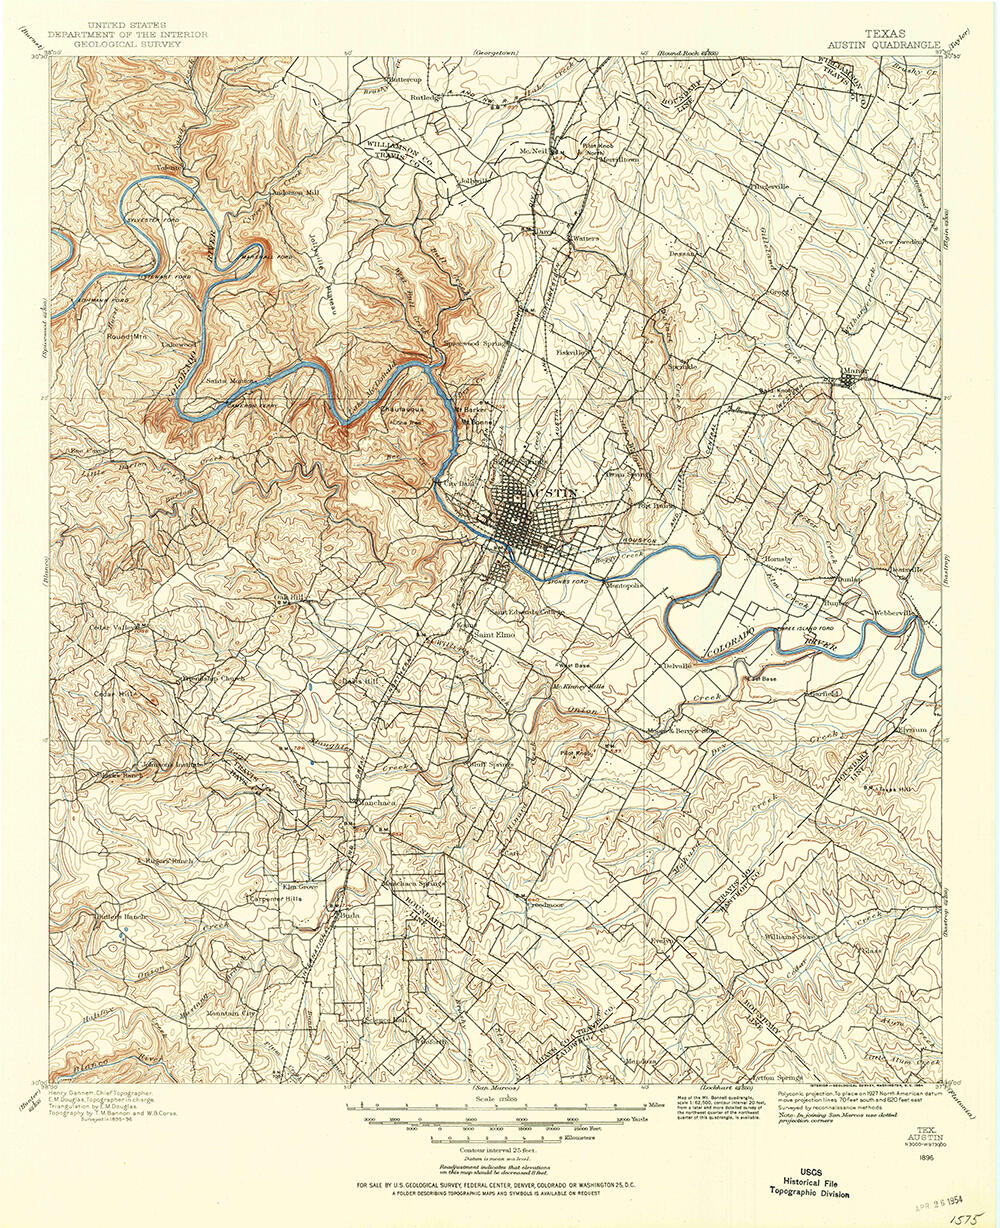 Scan of the1886 legacy topographic map quadrangle of the greater Austin, Texas area from the USGS Historic Topographic Map Colle